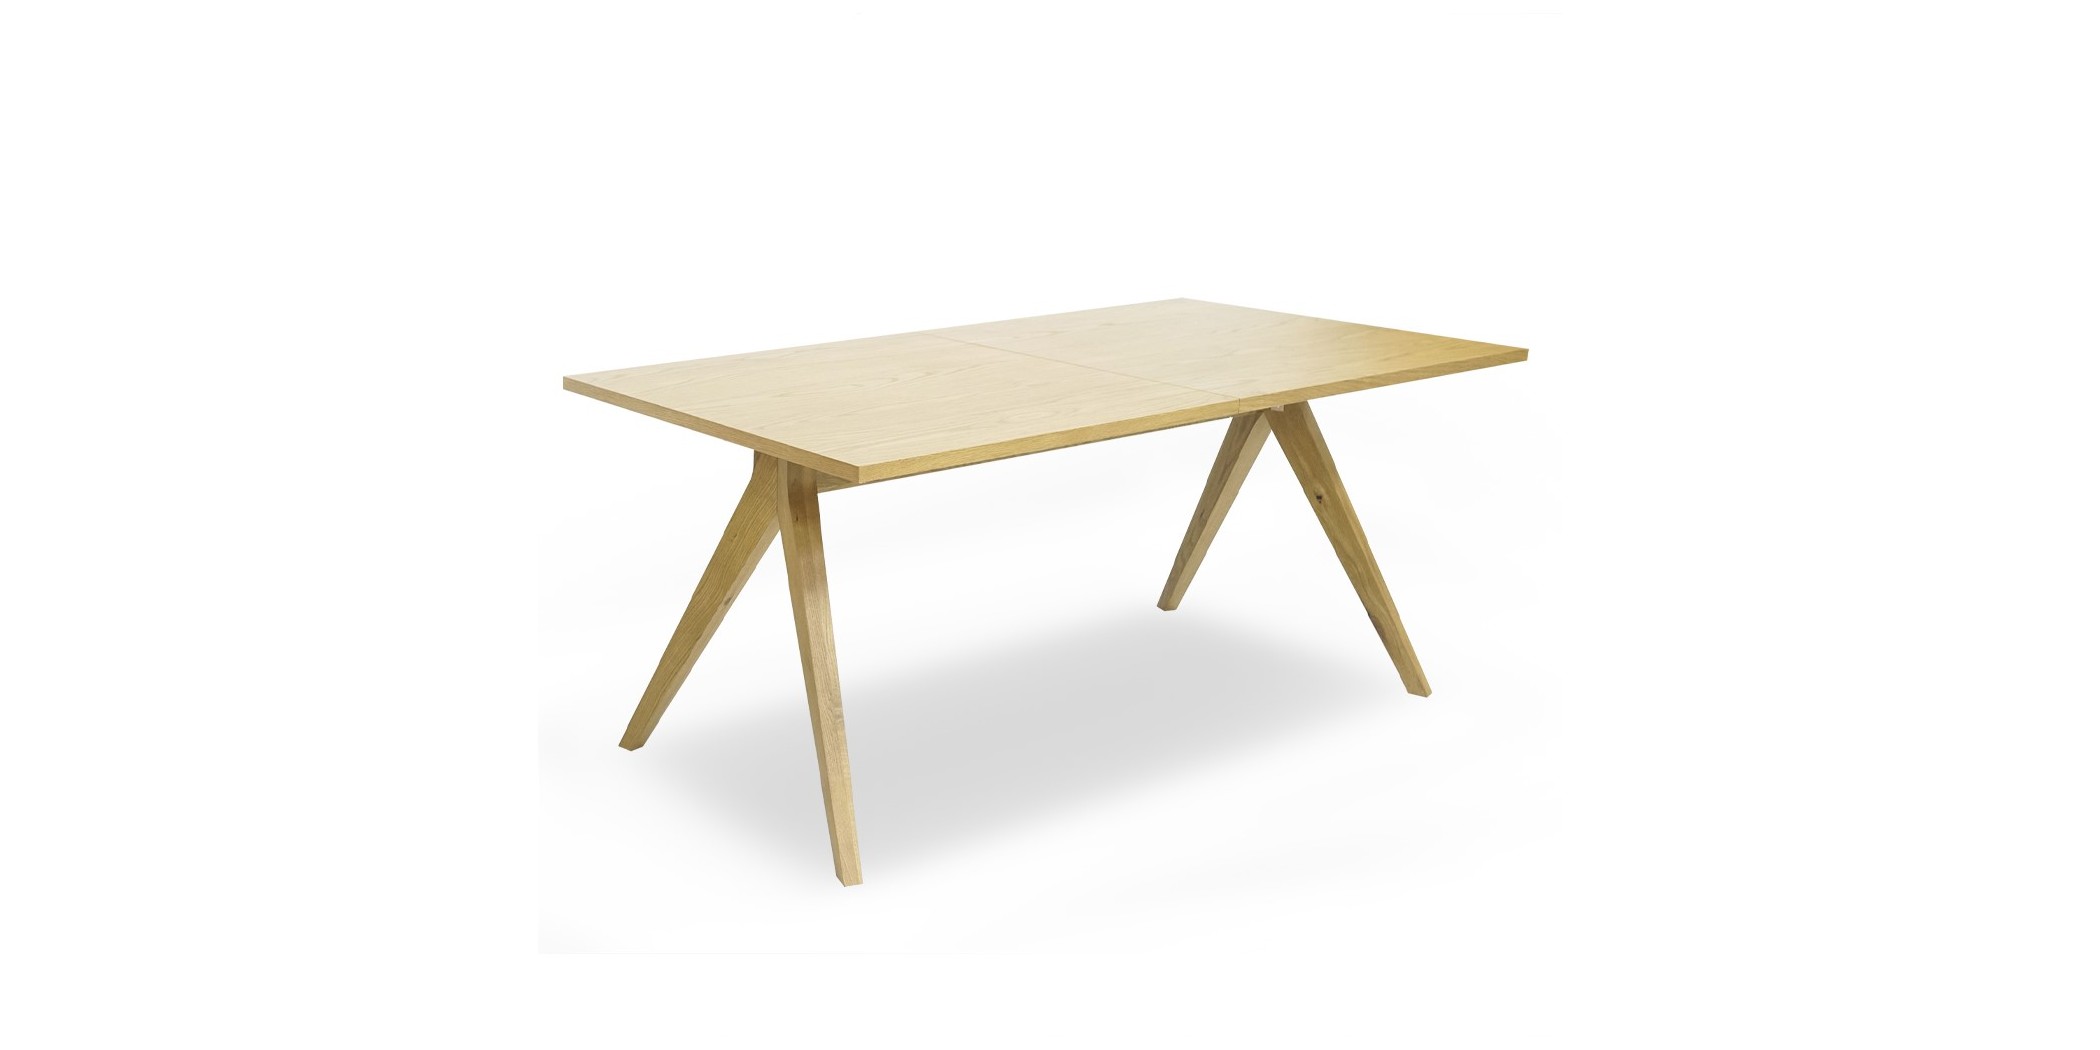 Wingrove Extensible Dining Table